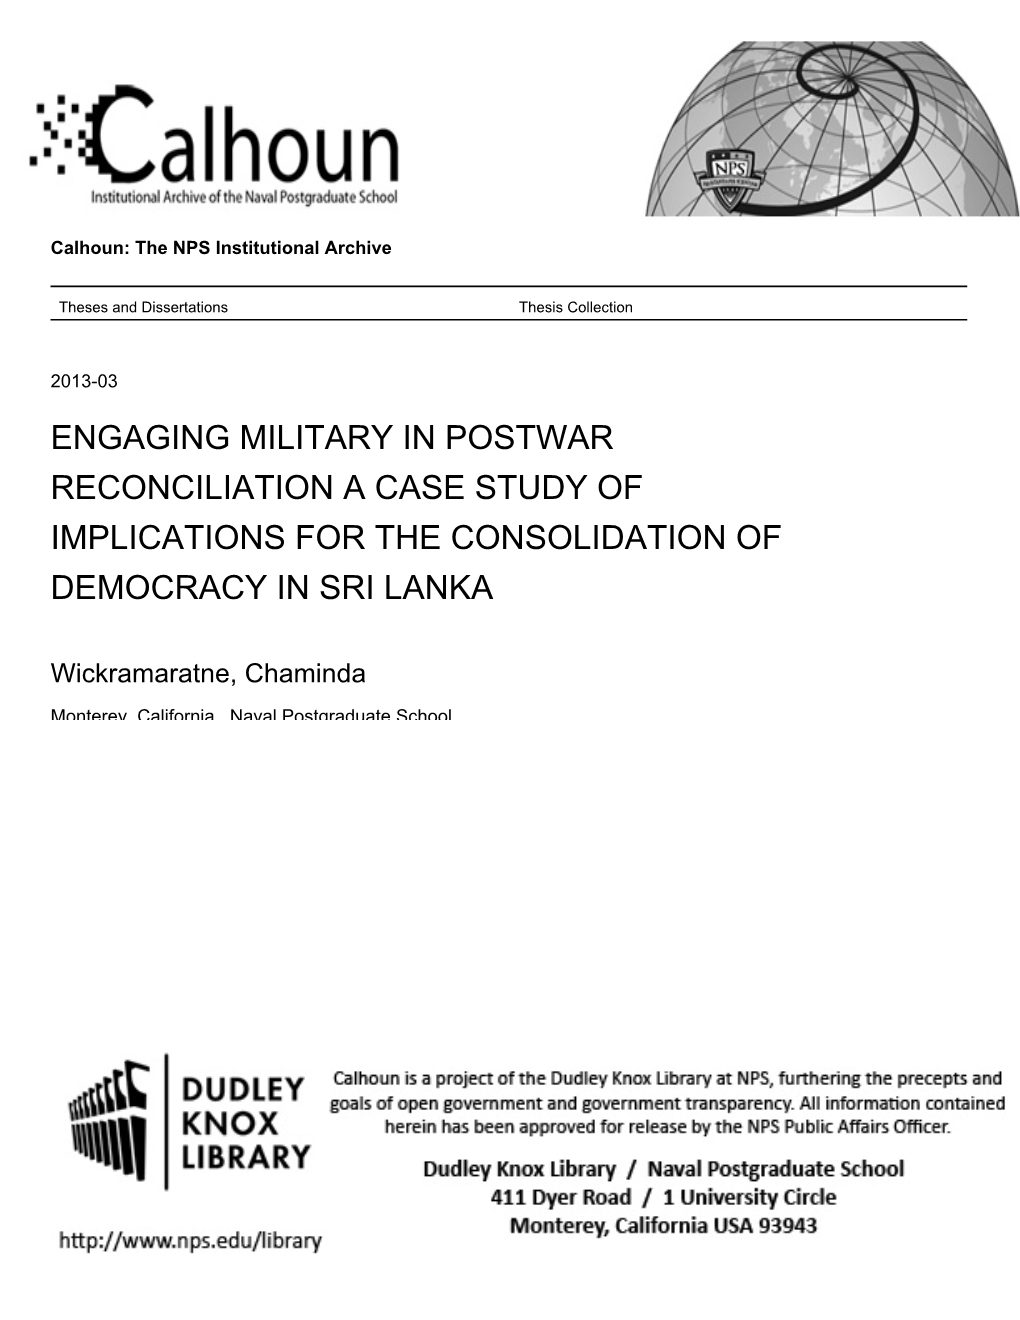 Engaging Military in Postwar Reconciliation a Case Study of Implications for the Consolidation of Democracy in Sri Lanka